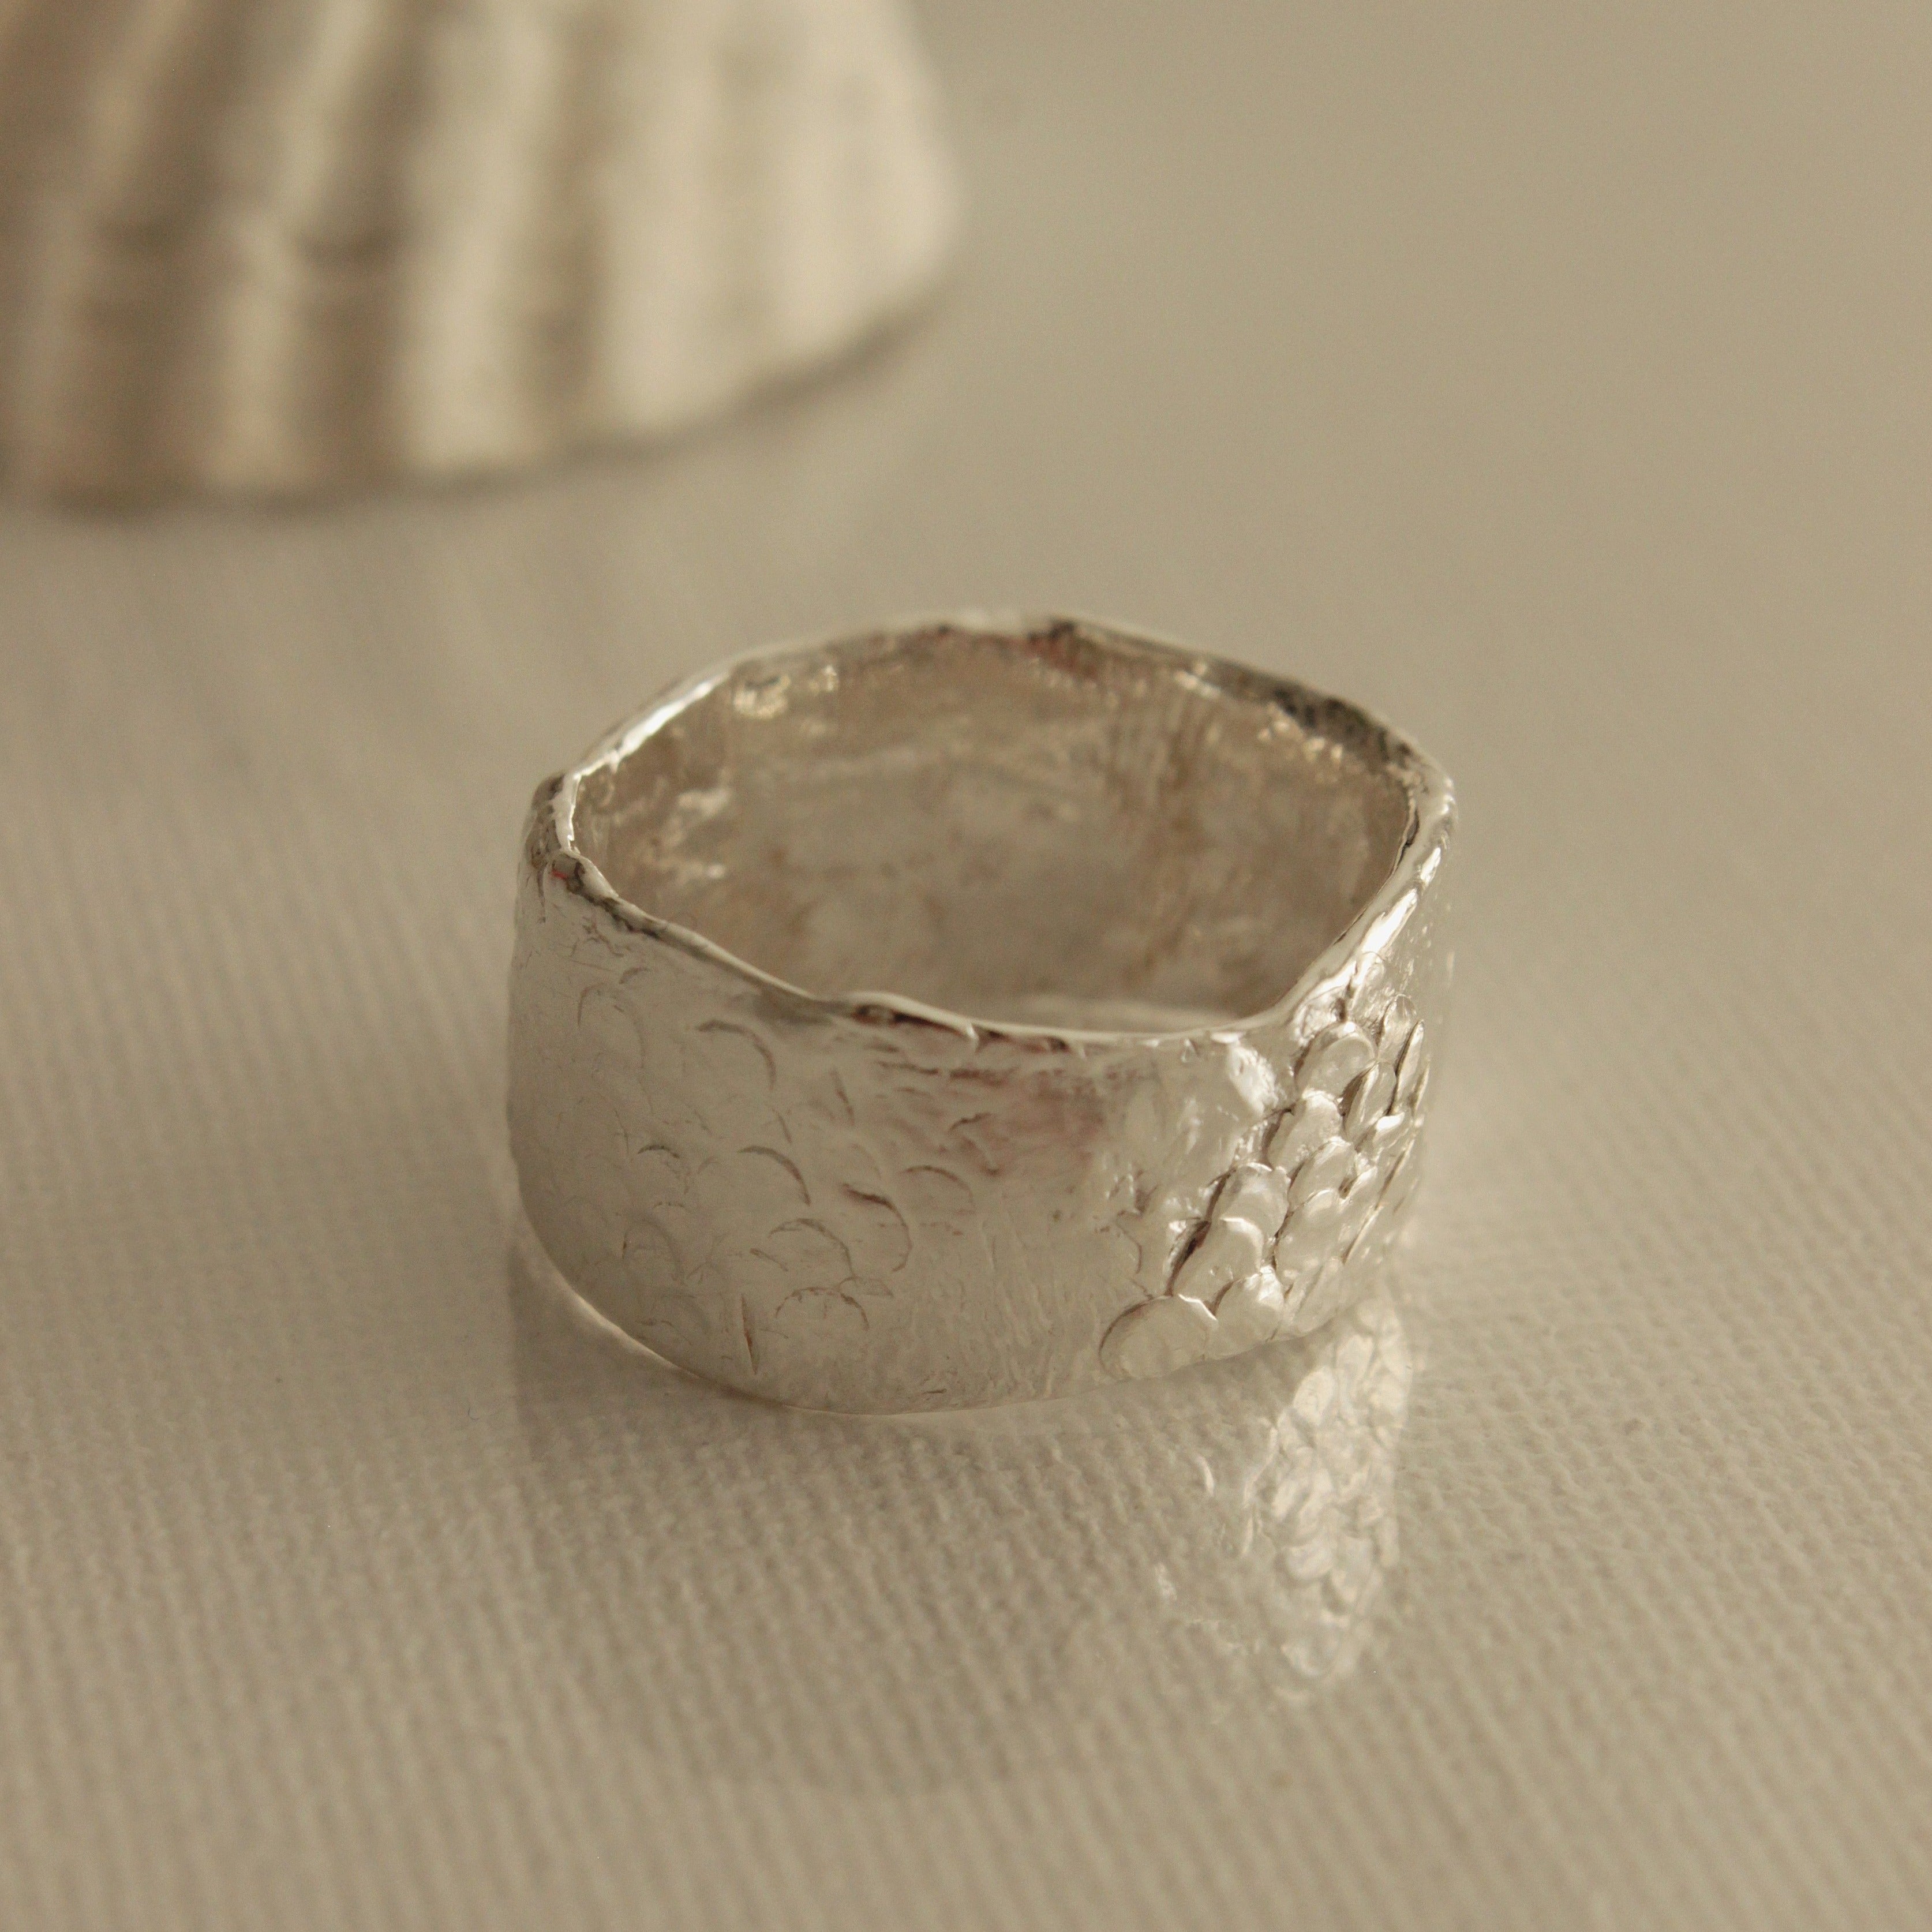 The Ancient Poet ring appears as though it has been plucked from the depths of the ocean. Scattered scales and hidden finger prints caress this organically formed band and offer a unique magic to this timeless piece. Enjoy this treasure everyday, along with the calming and tranquil effects it brings.